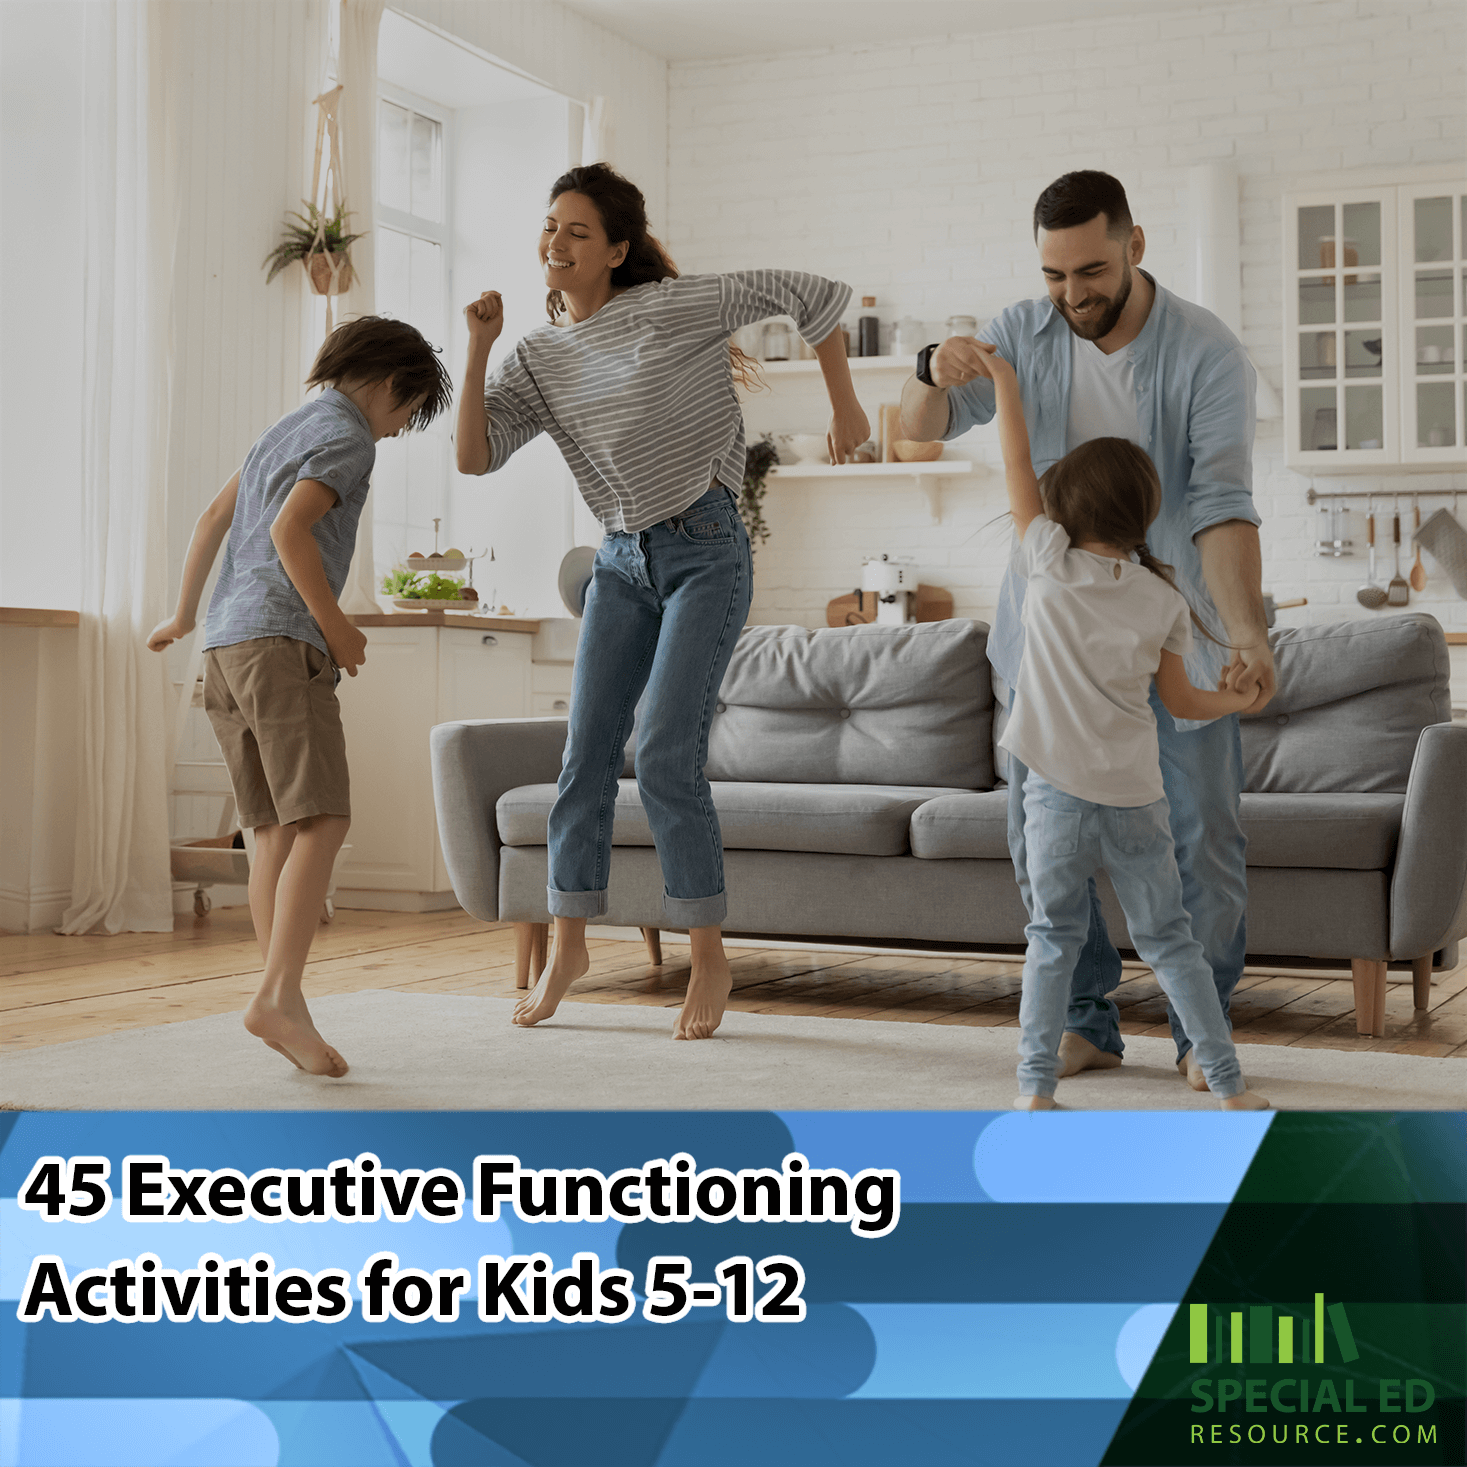 A happy family dancing in a living room, featuring a mother, father, and two children, one boy and one girl, all engaged in playful movement. The room has a cozy, modern decor with a large couch, white brick walls, and house plants. Overlay text states '45 Executive Functioning Activities for Kids 5-12' with a logo for SpecialEdResource.com at the bottom.